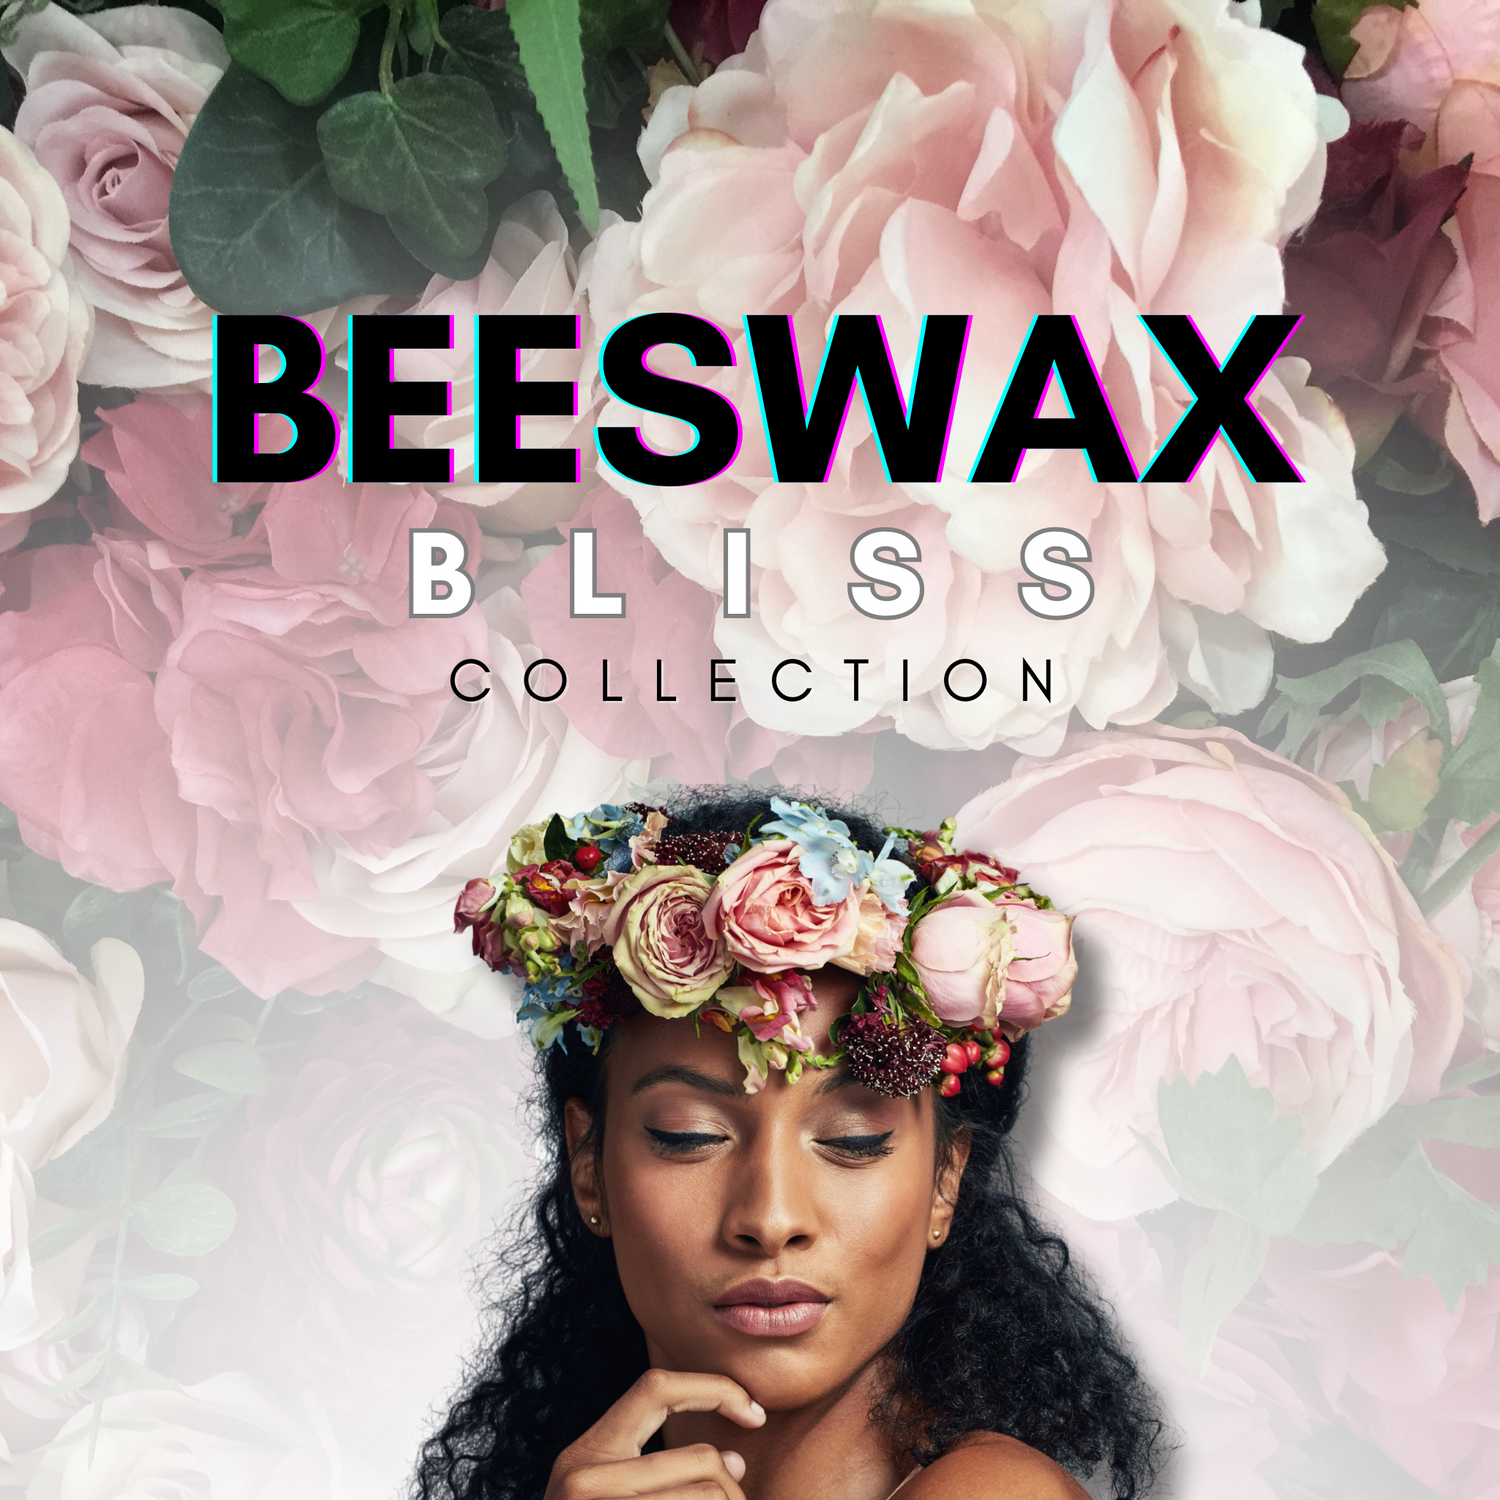 Beeswax Bliss Collection